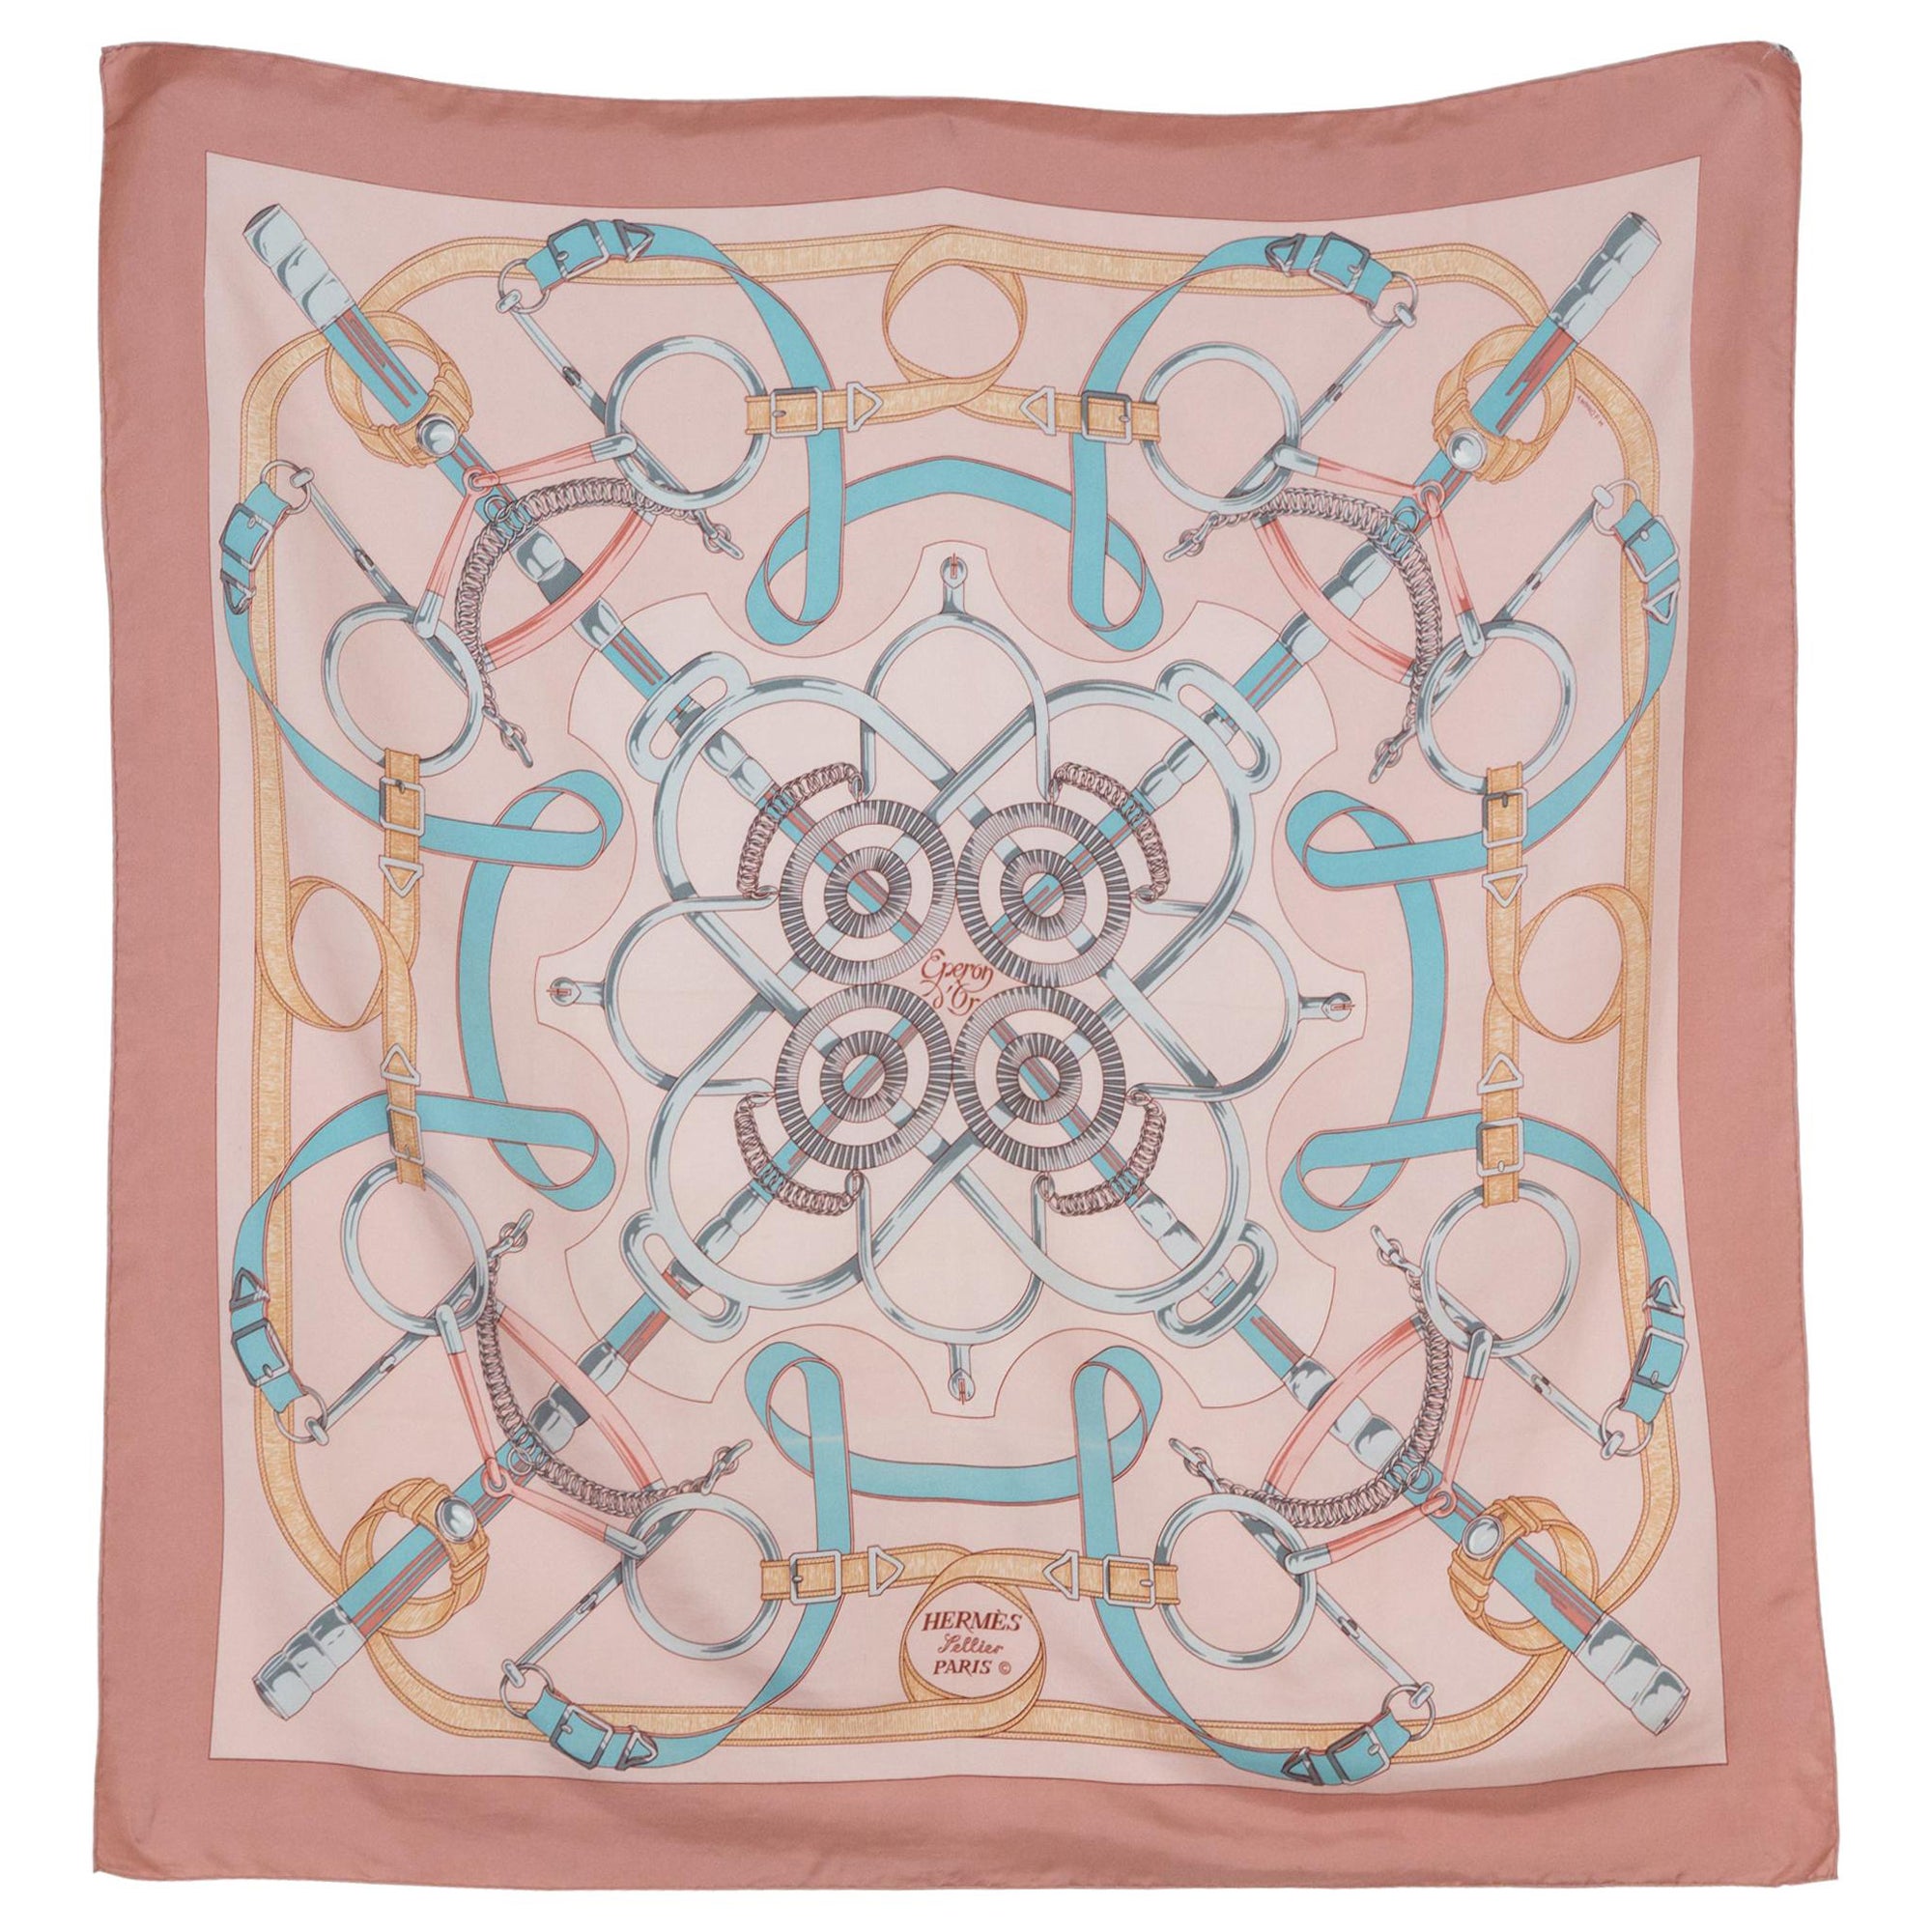 Hermes 1964 Red Etriers by F.de la Perriere Silk Scarf For Sale at 